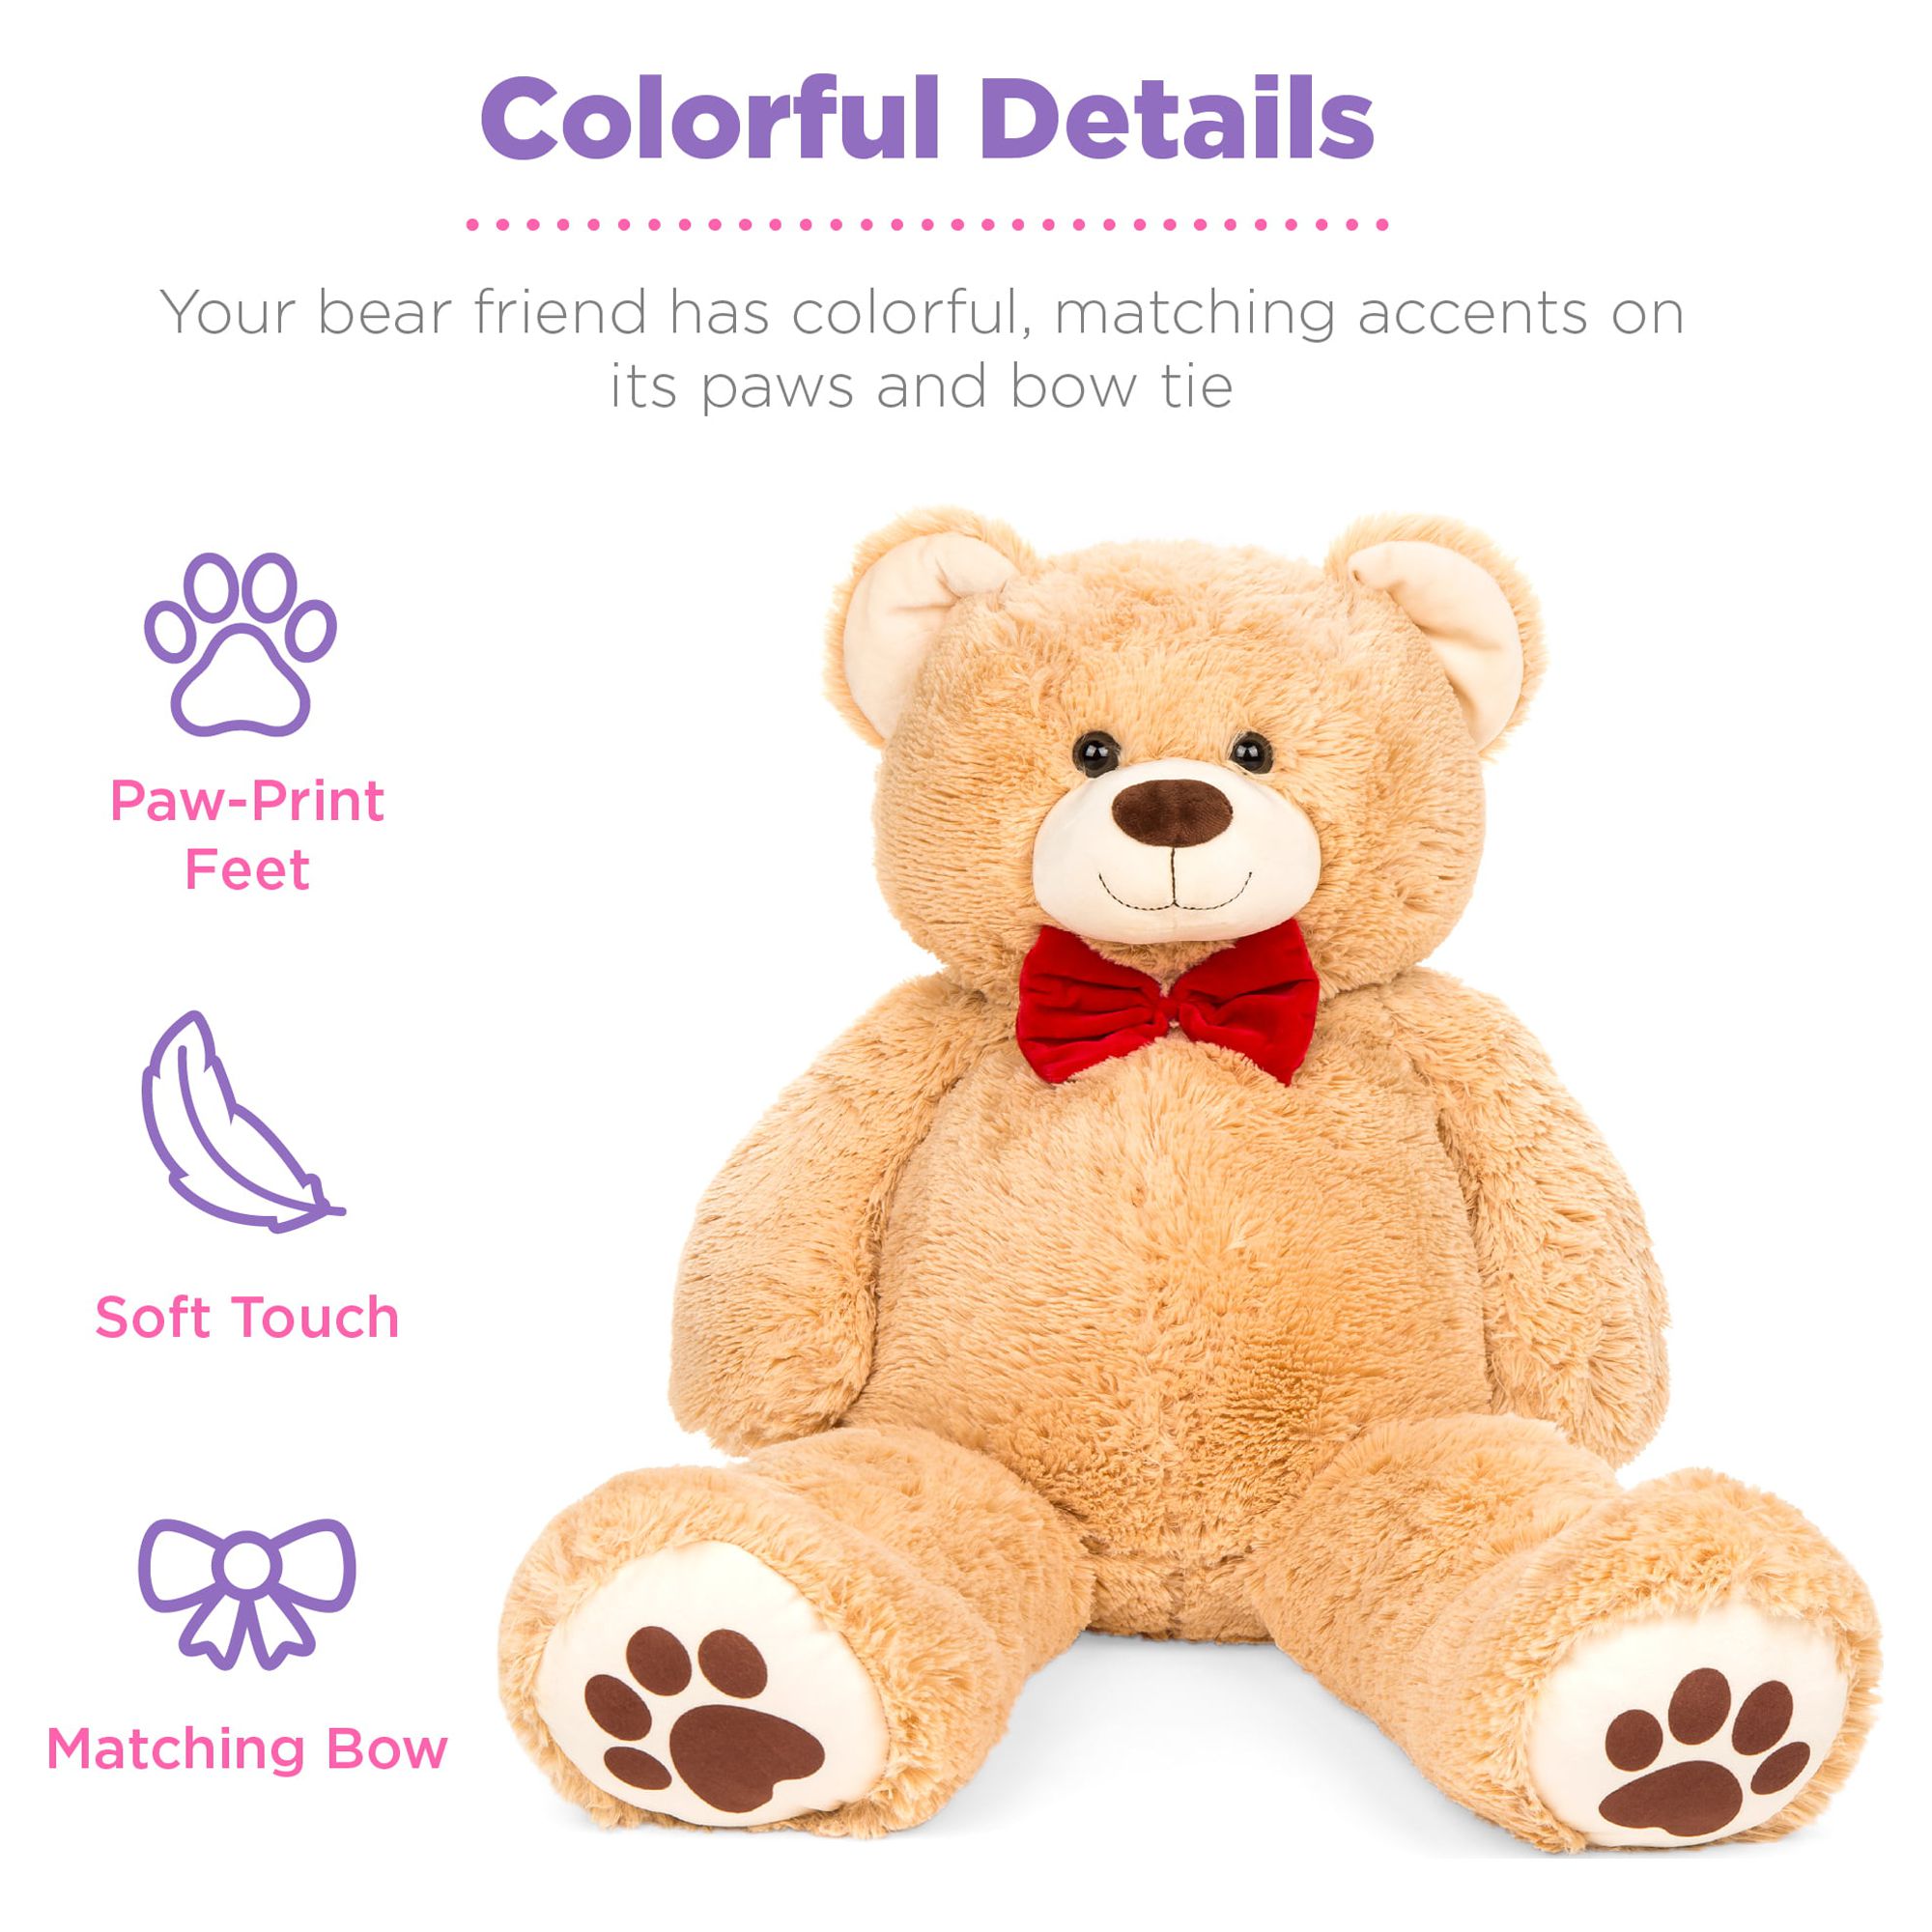 Best Choice Products 35in Giant Soft Plush Teddy Bear Stuffed Animal Toy w/ Bow Tie, Footprints - Brown - image 5 of 8